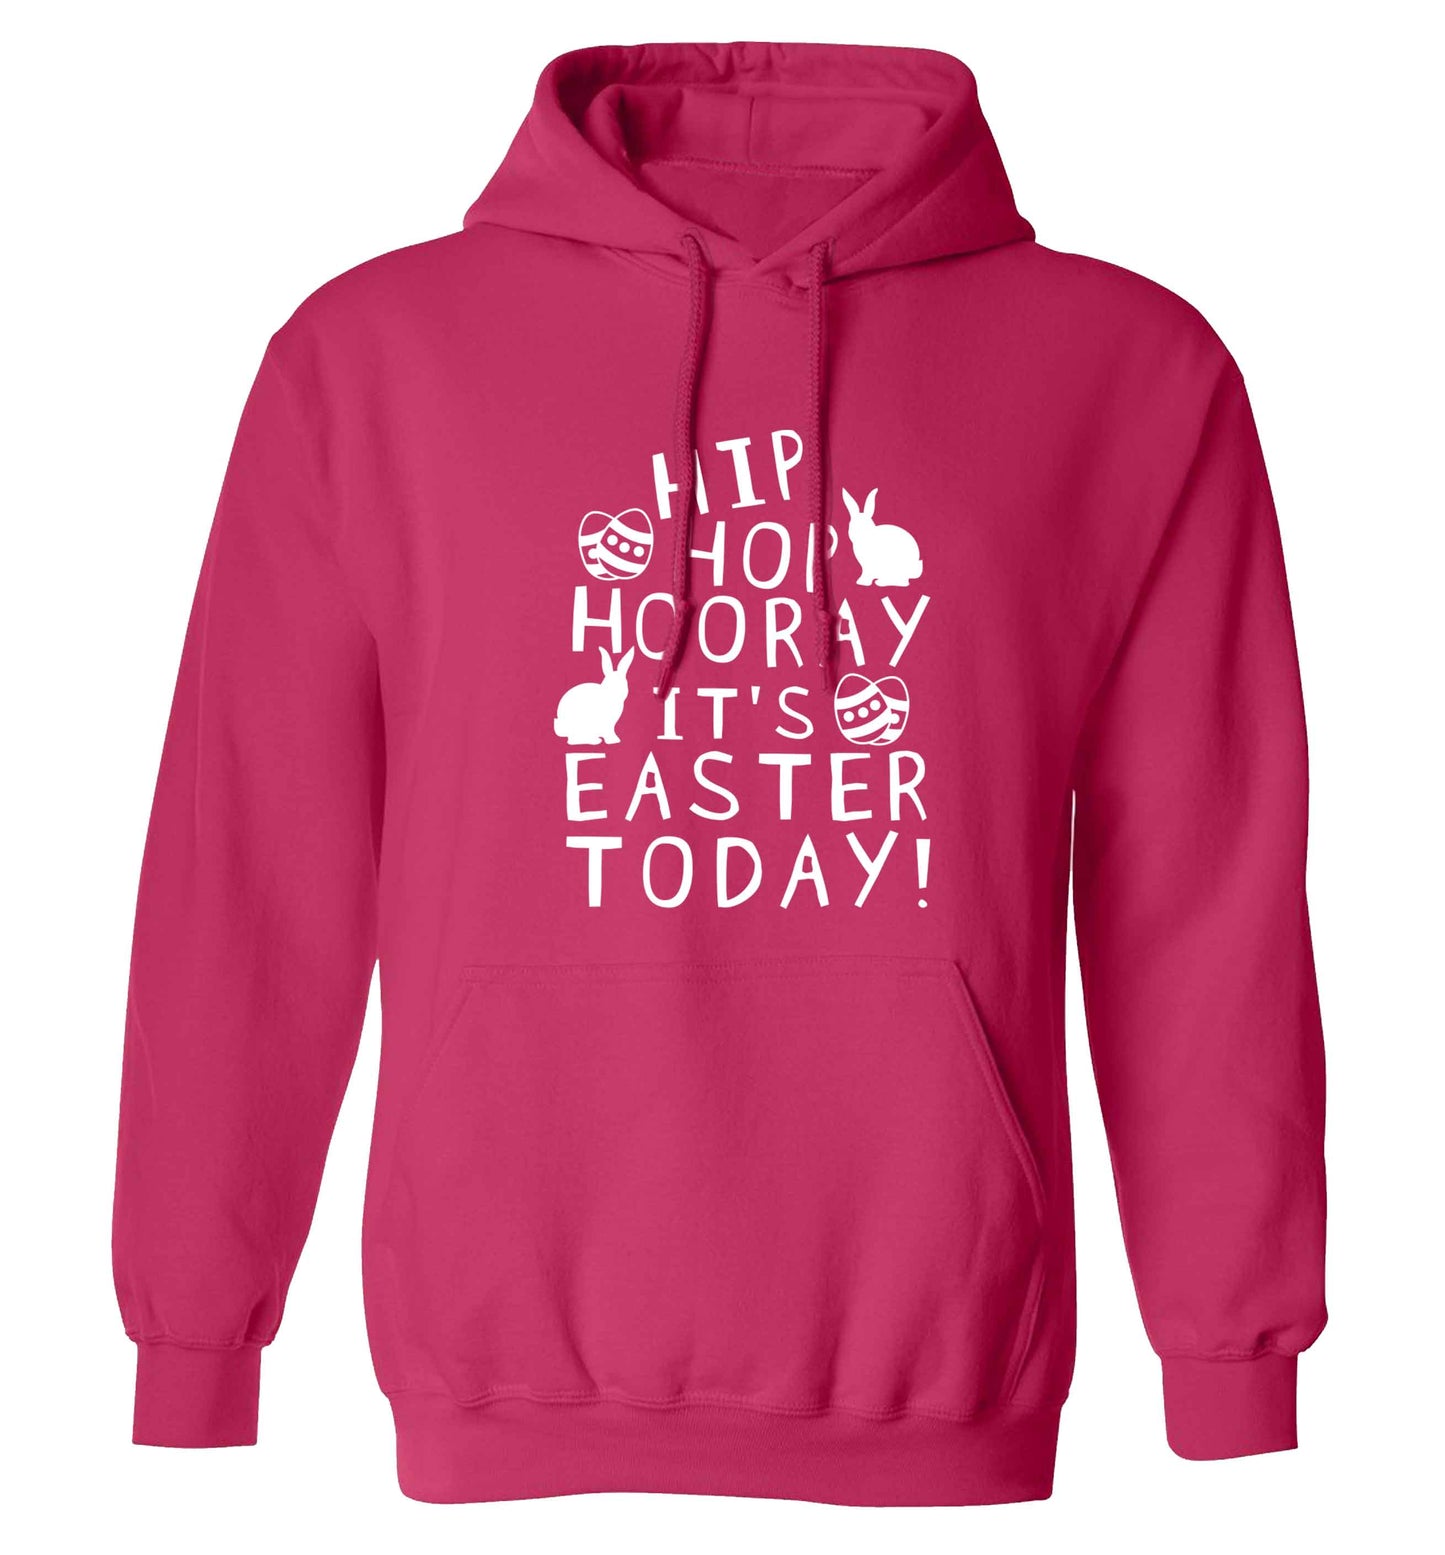 Hip hip hooray it's Easter today! adults unisex pink hoodie 2XL